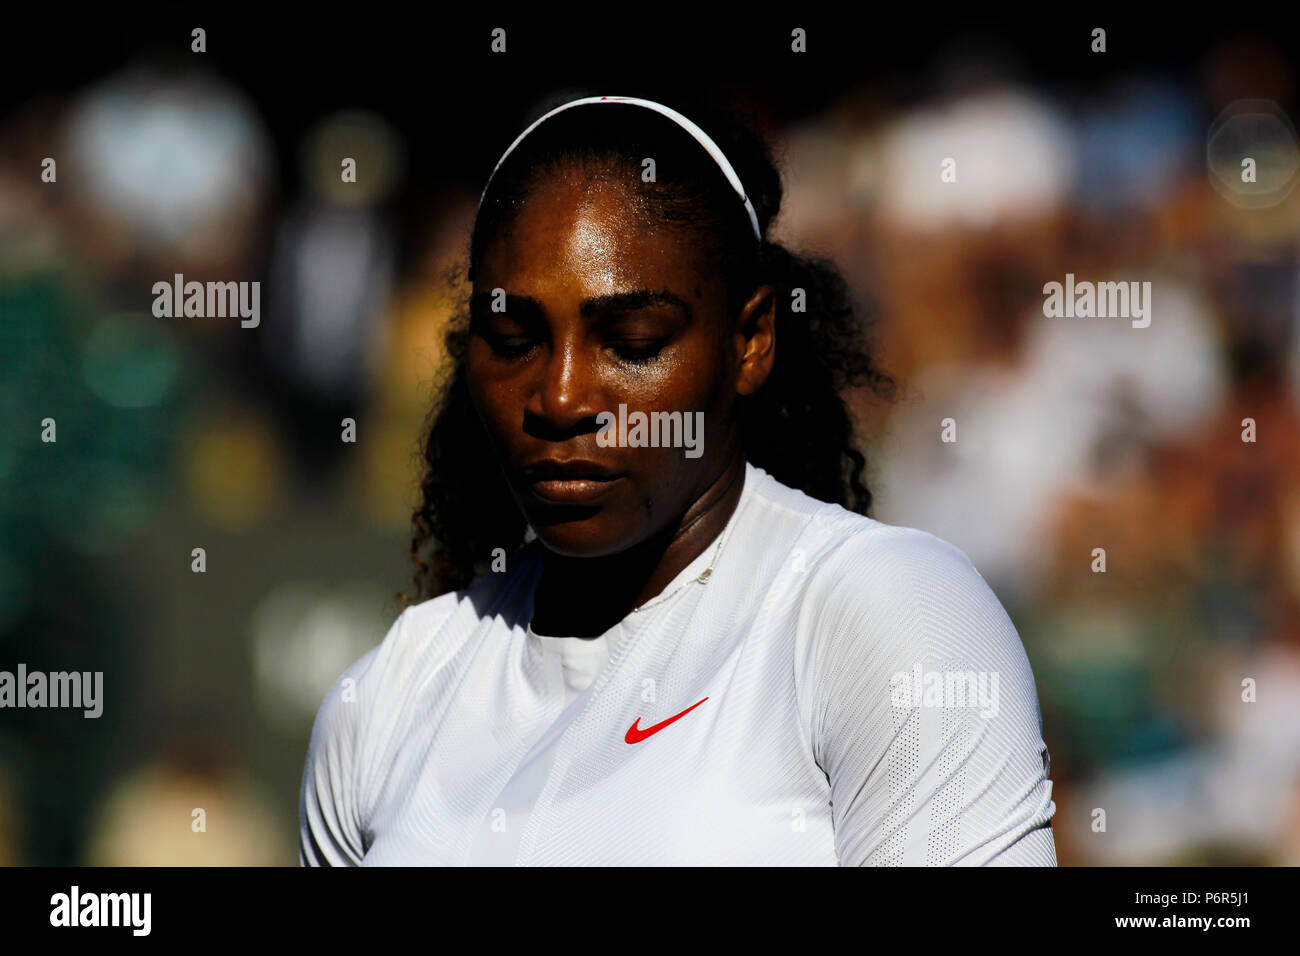 London, England, July 2nd, 2018: Wimbledon Tennis:  Serena Williams of the United States during her first round match against Arantxa Rus of Sweden Credit: Adam Stoltman/Alamy Live News Stock Photo